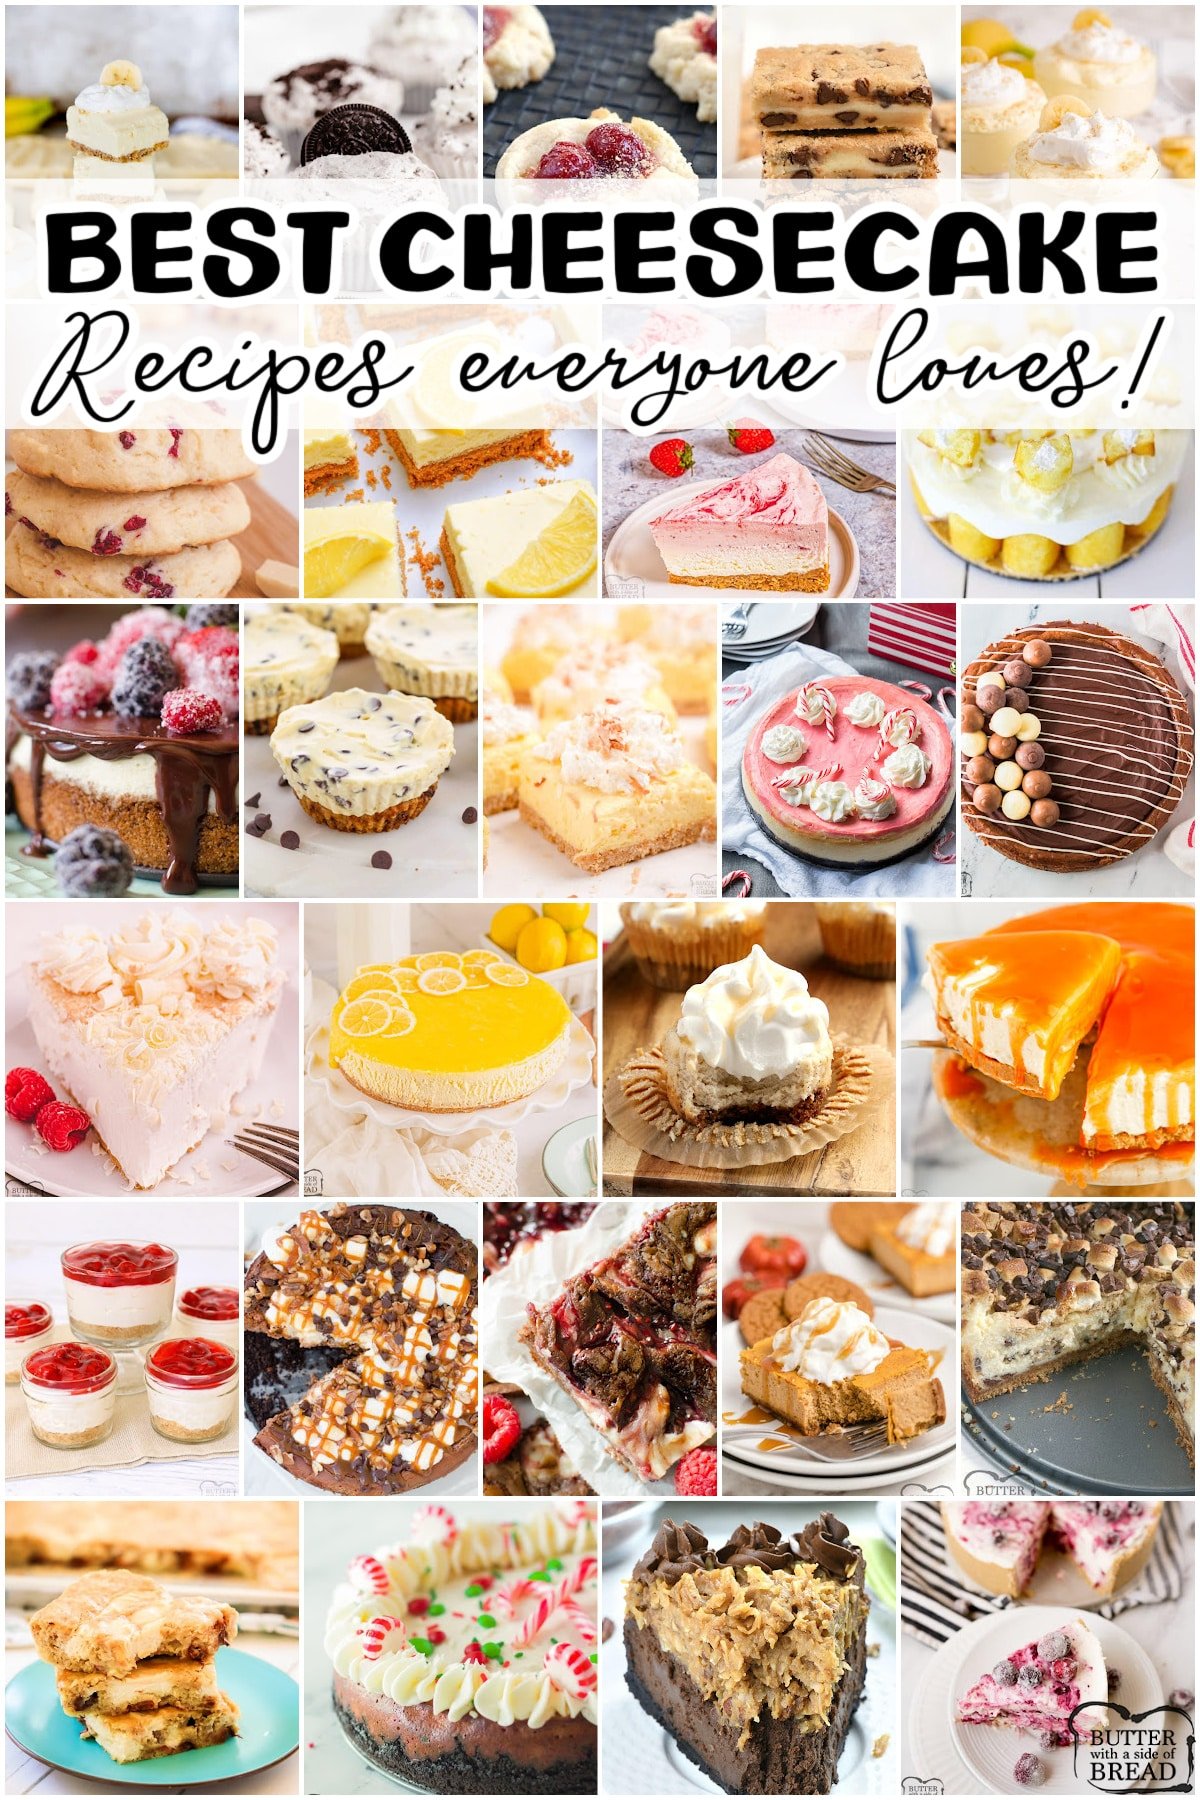 A fantastic collection of our BEST Cheesecake Recipes! This classic dessert is great for so many occasions, give them a try today and see which one of these unique cheesecakes are your favorite! 